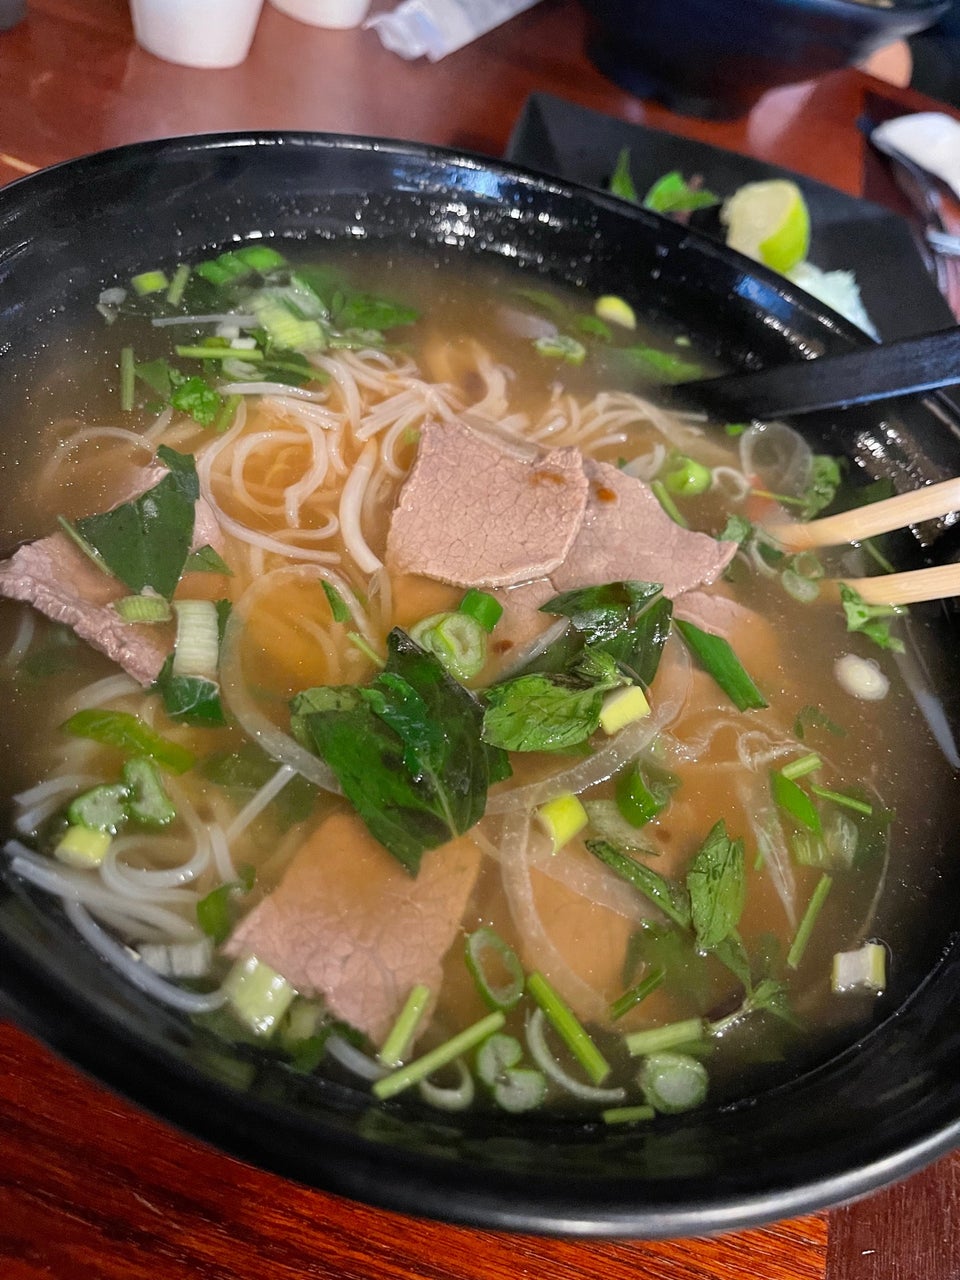 House of Pho